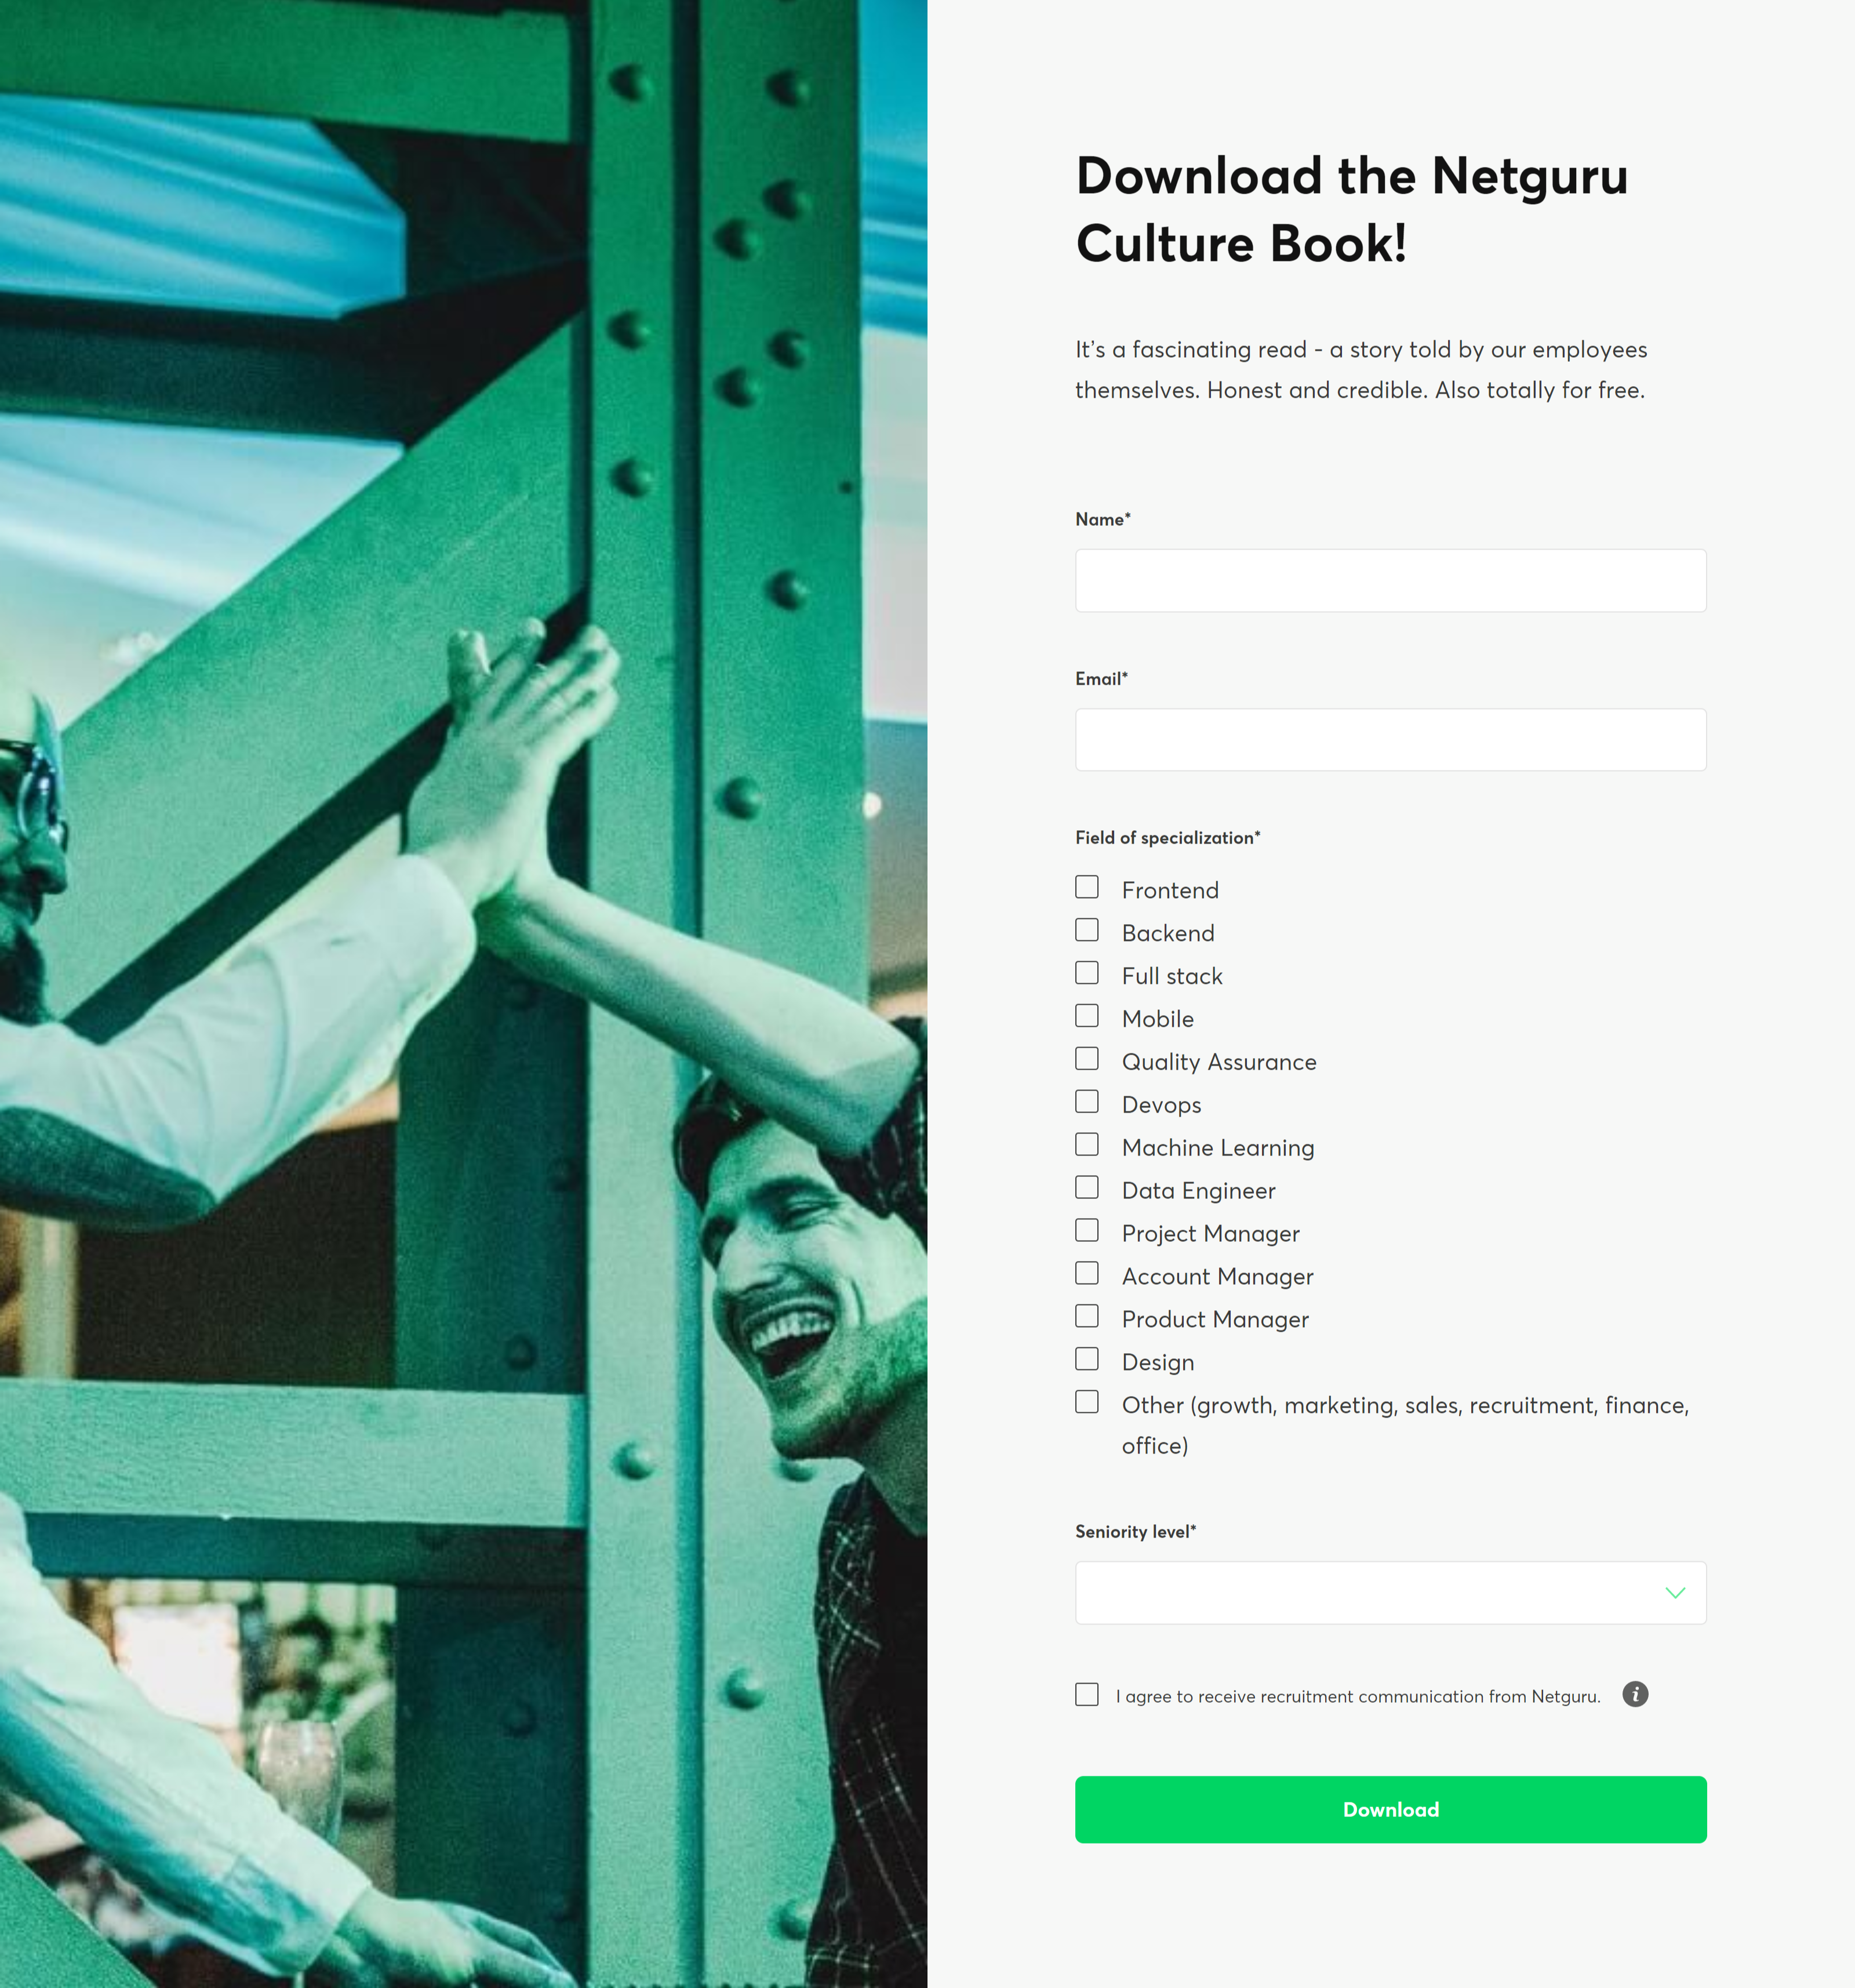 A webpage by Netguru inviting you to download their Culture Book in exchange for your email